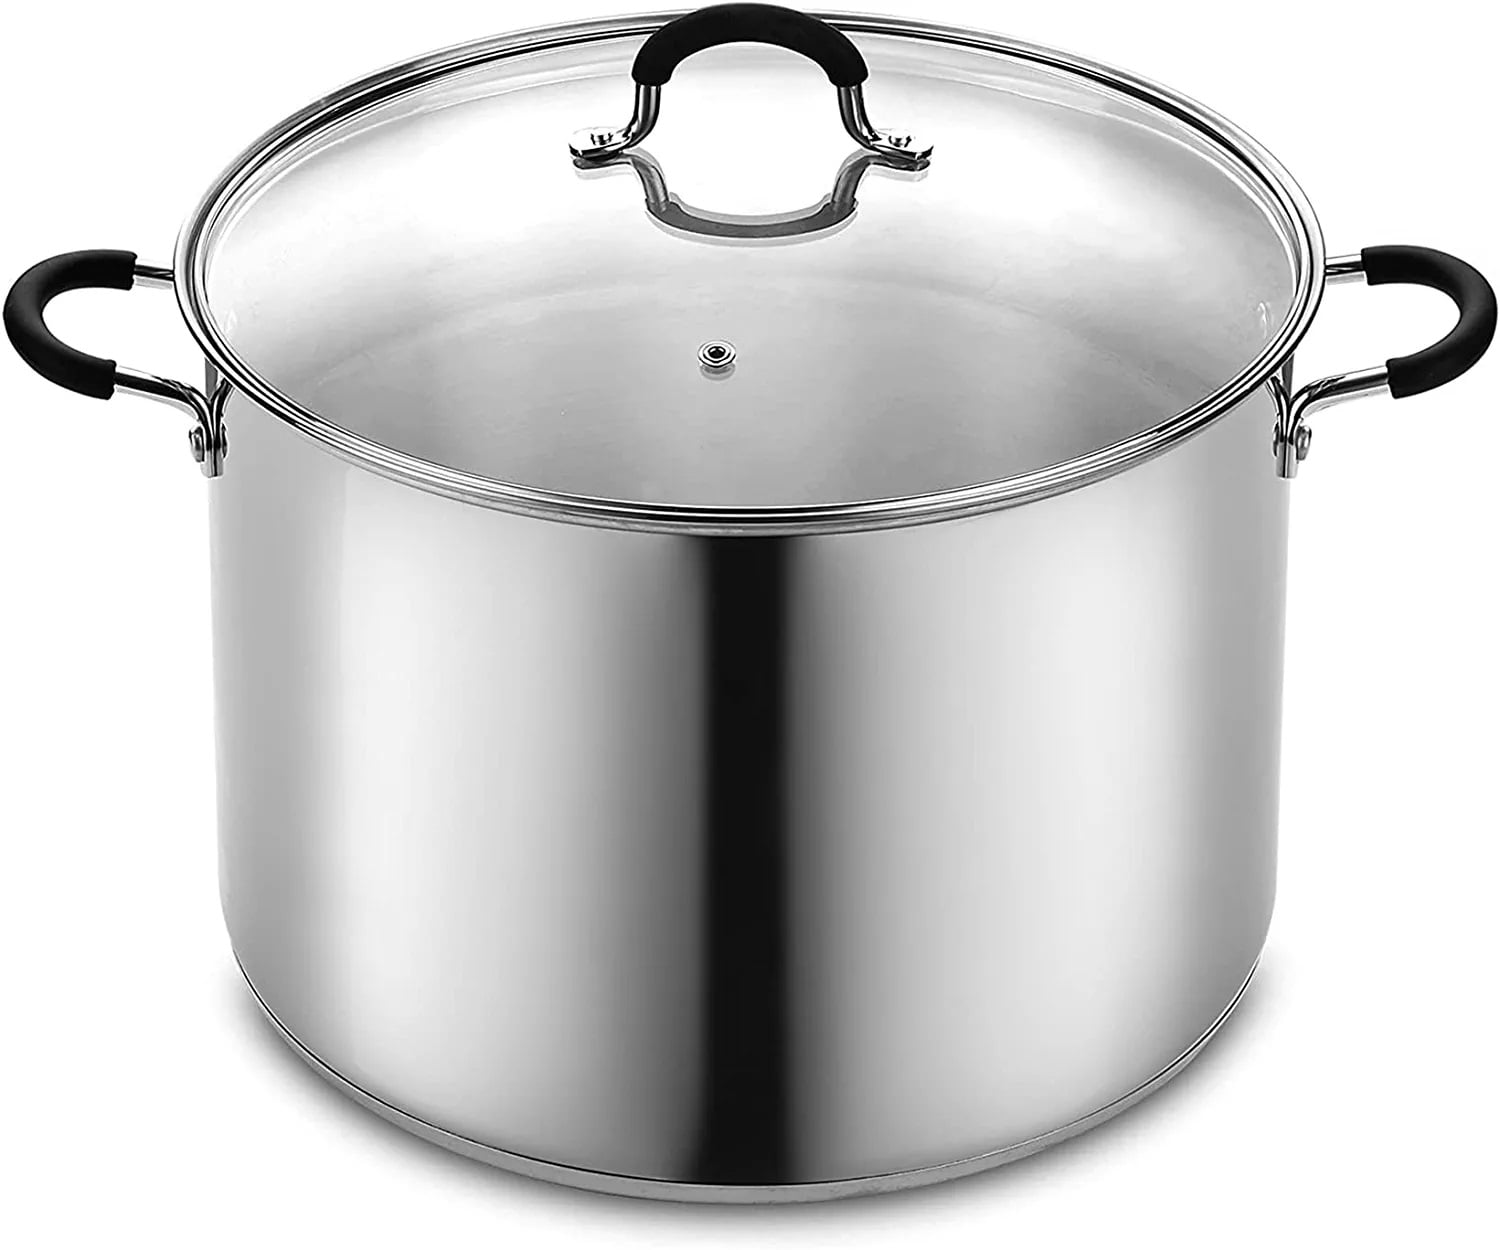 Huaroad Stainless Steel Stockpot Large Pot Sauce Pot Induction Pot With  Lid- 3/4/5 Holes Pasta Cooker Insert Set For Home Kitchen Restaurant  Strainer